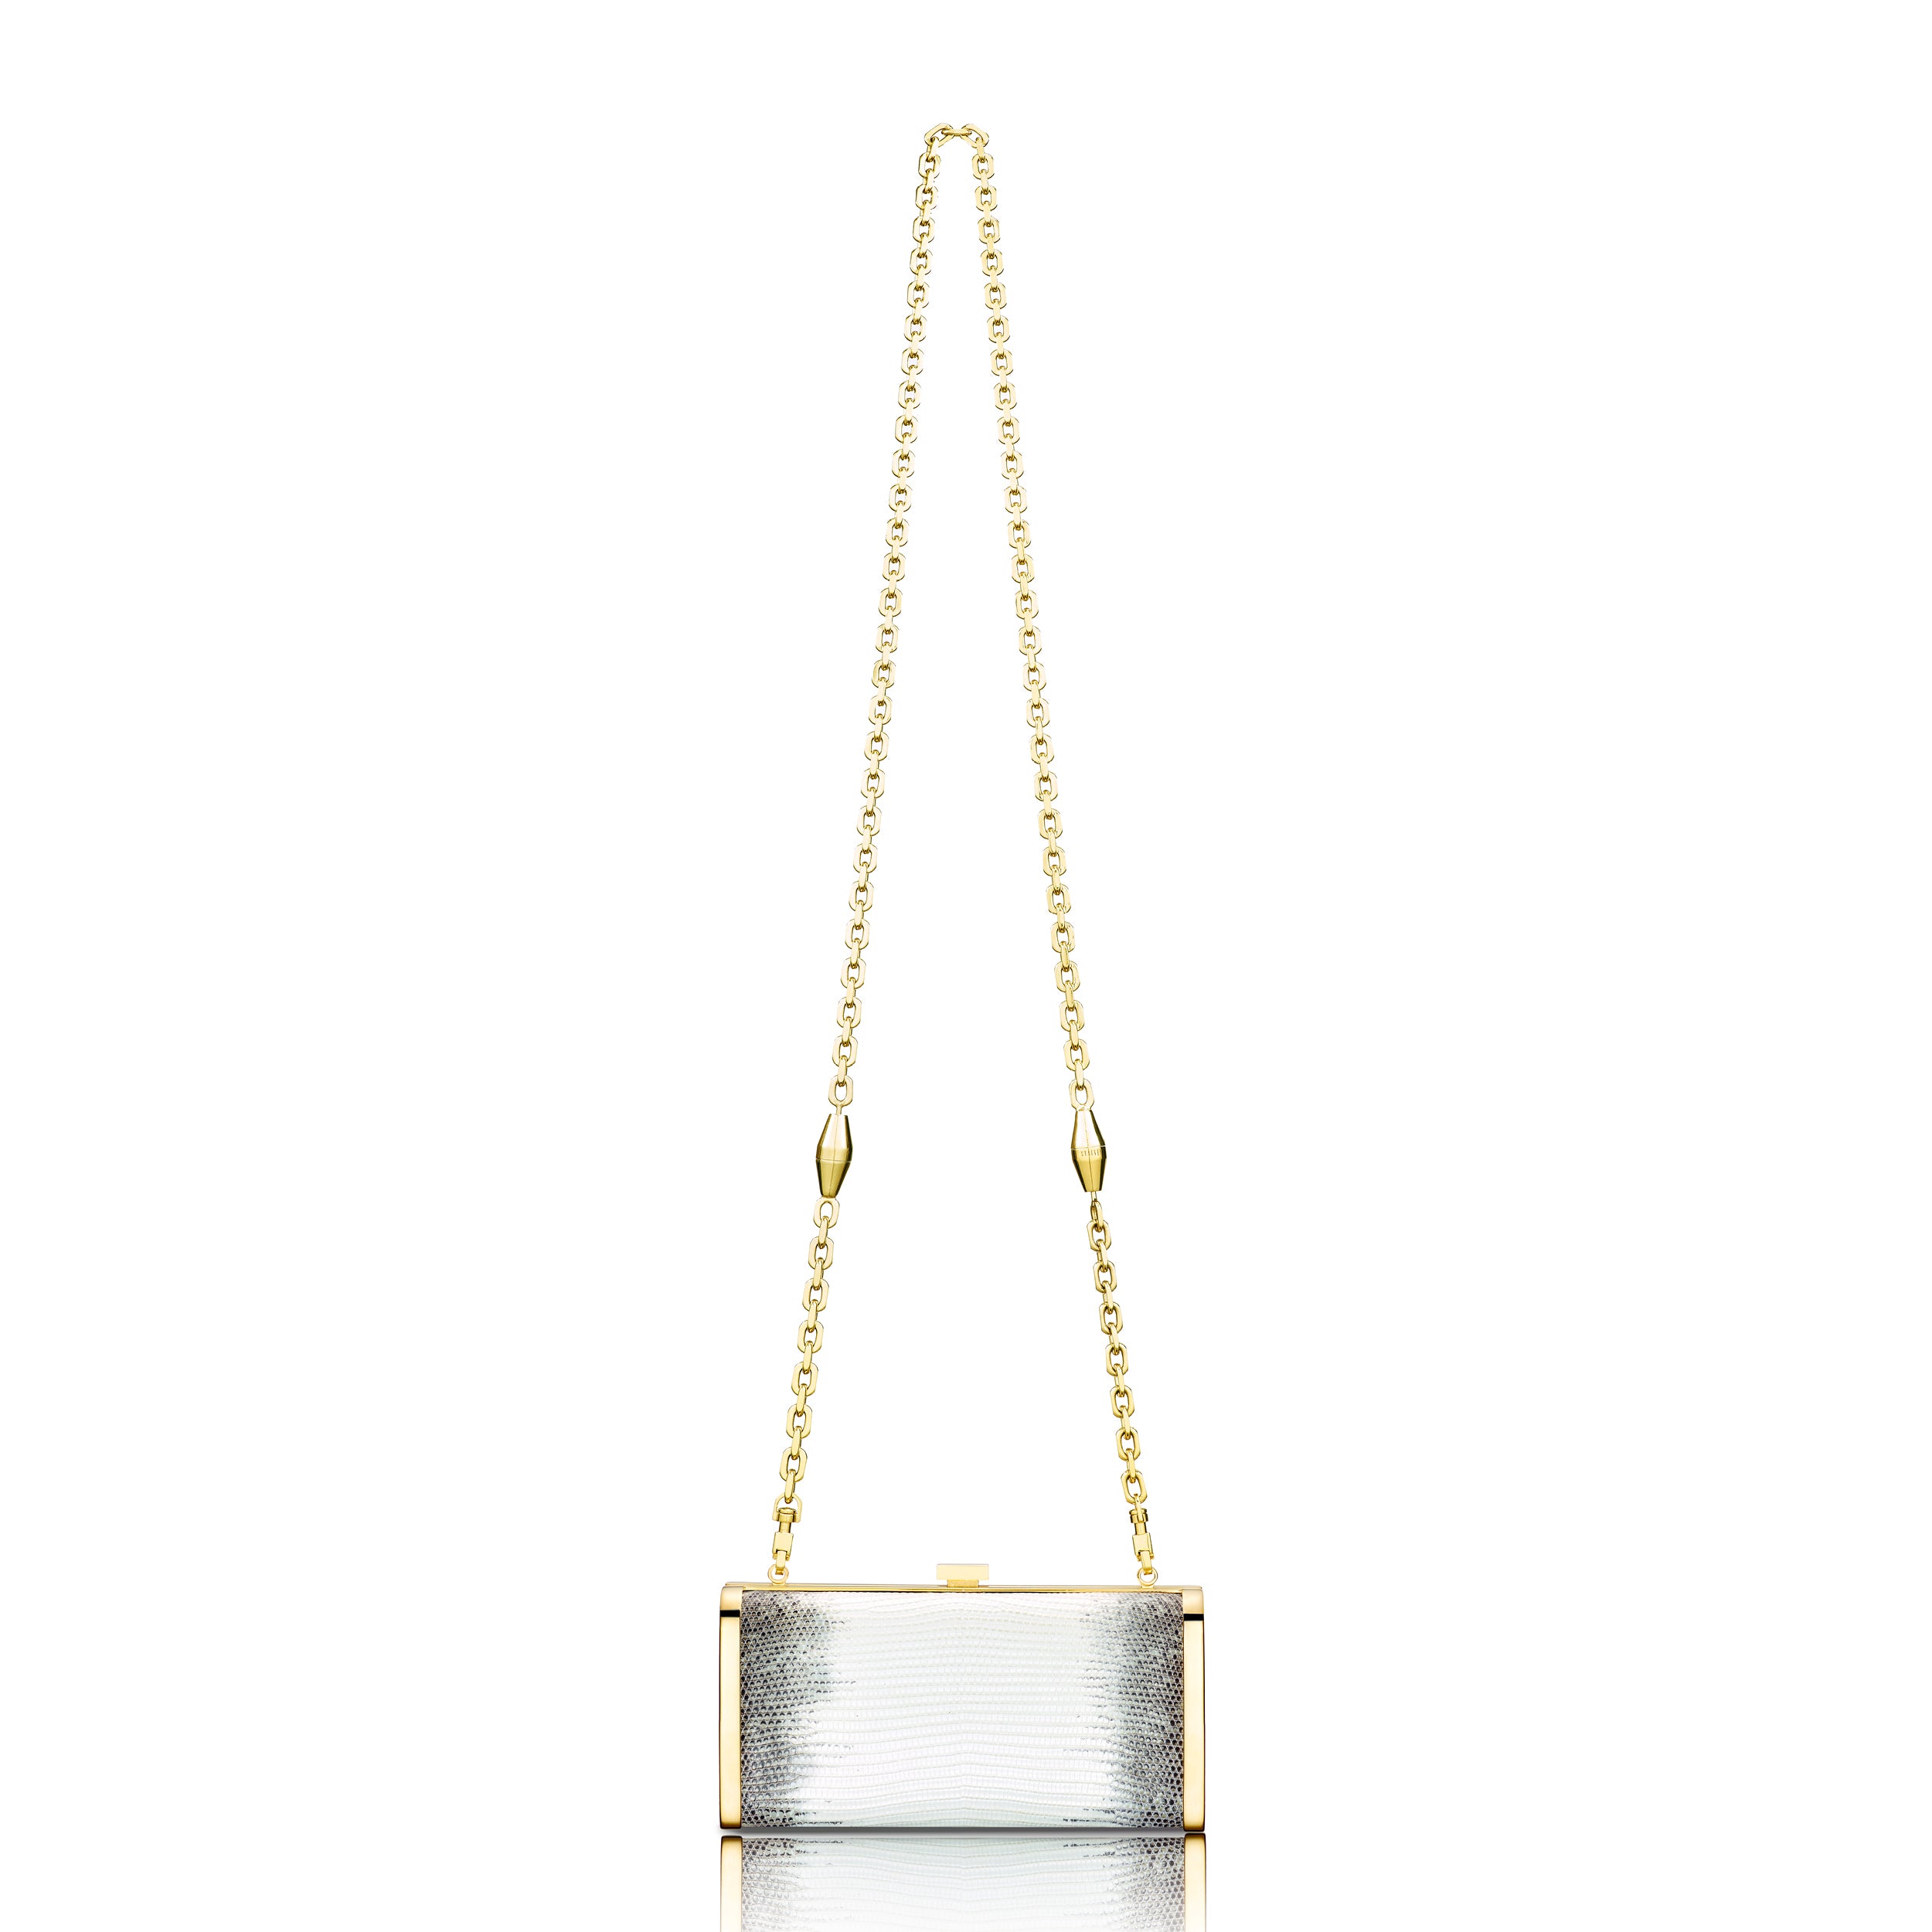 STALVEY Square Clutch in Natural Ring Lizard with 24kt Gold Hardware Back View with Chain